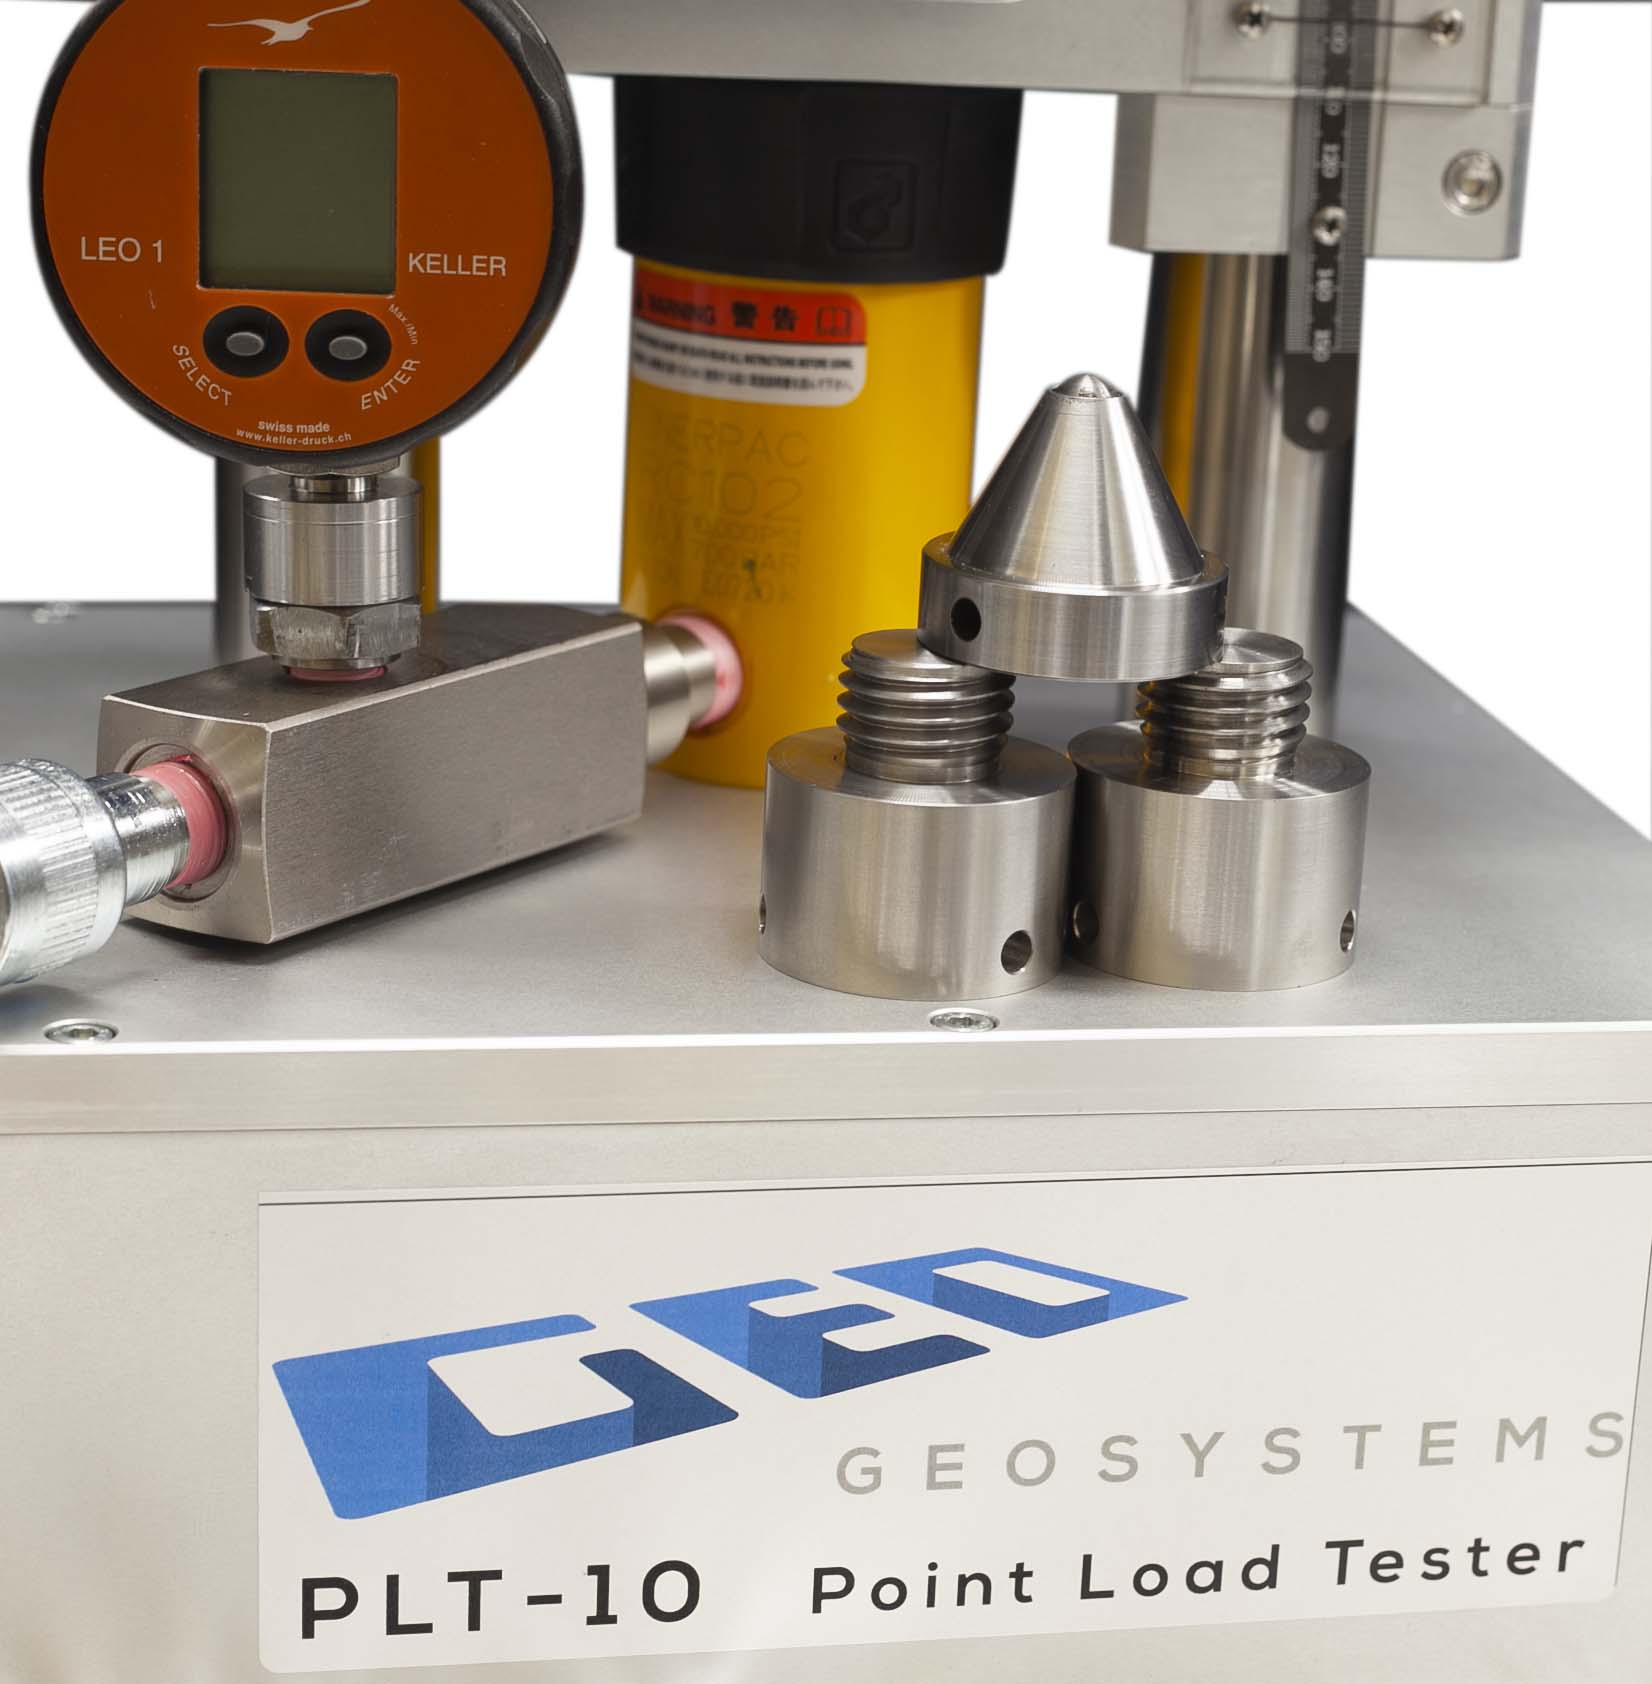 PLT-10 Point Load Tester – Video